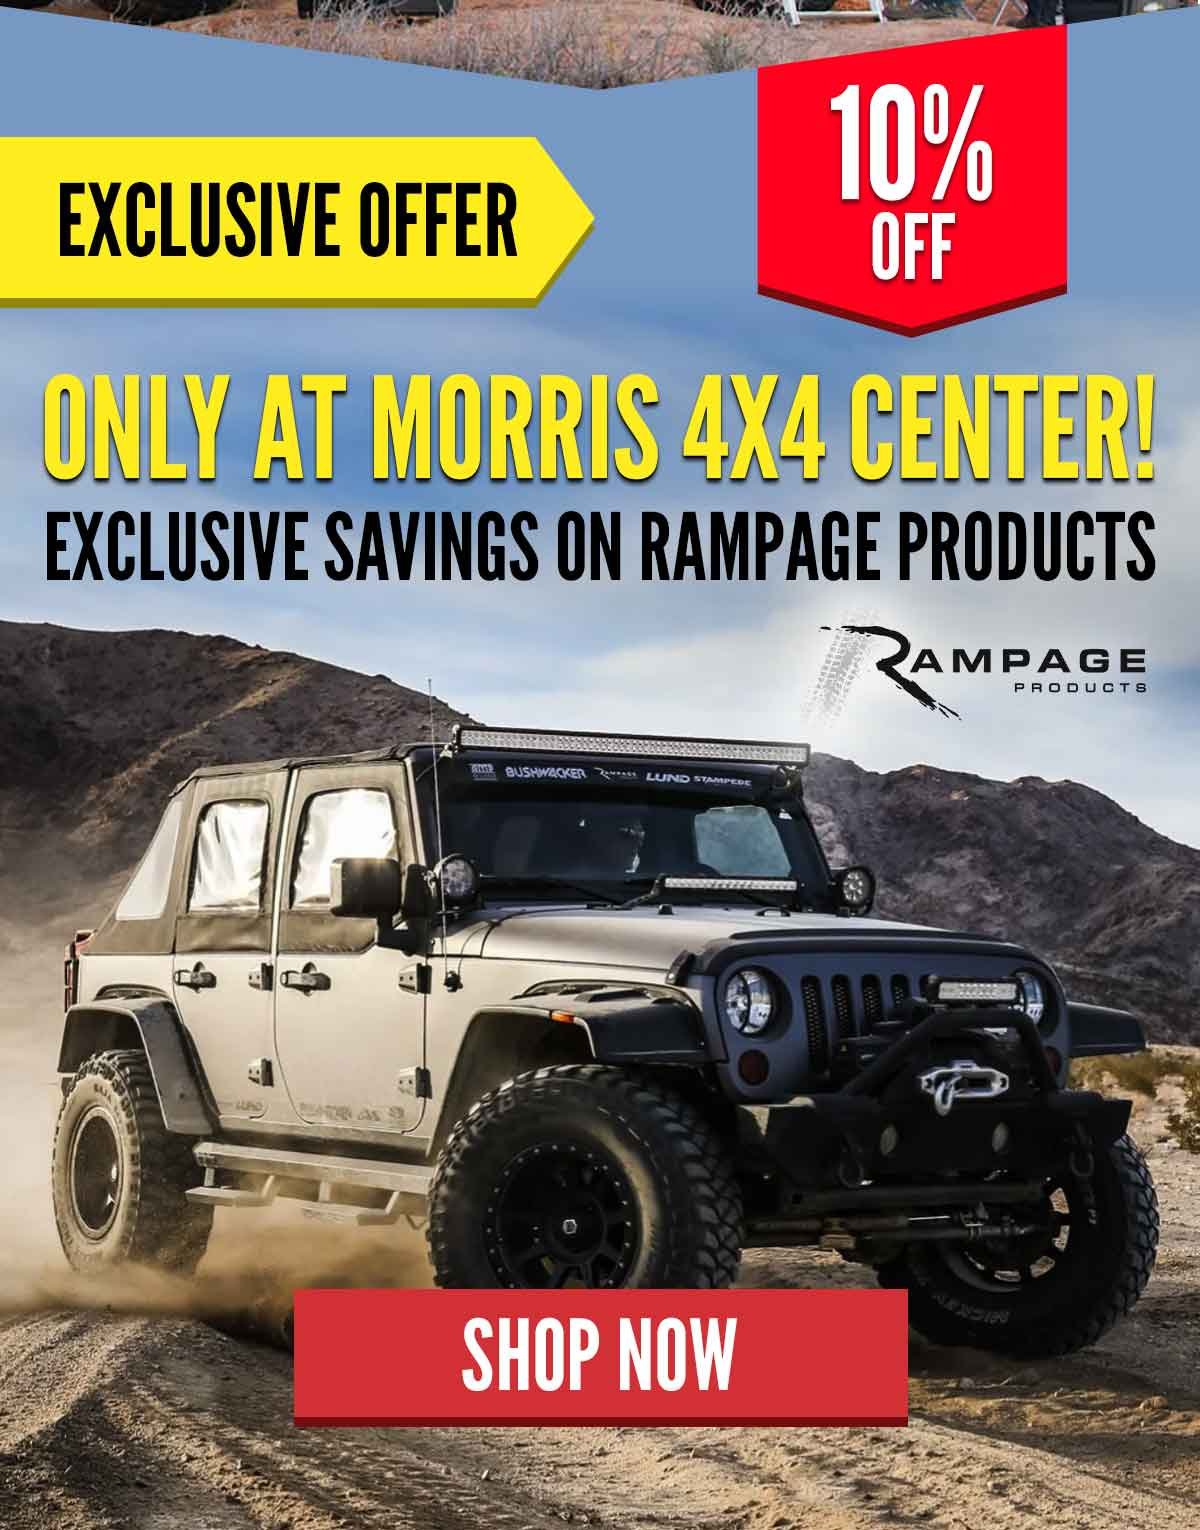 Only At Morris 4x4 Center! Exclusive Savings on Rampage Products